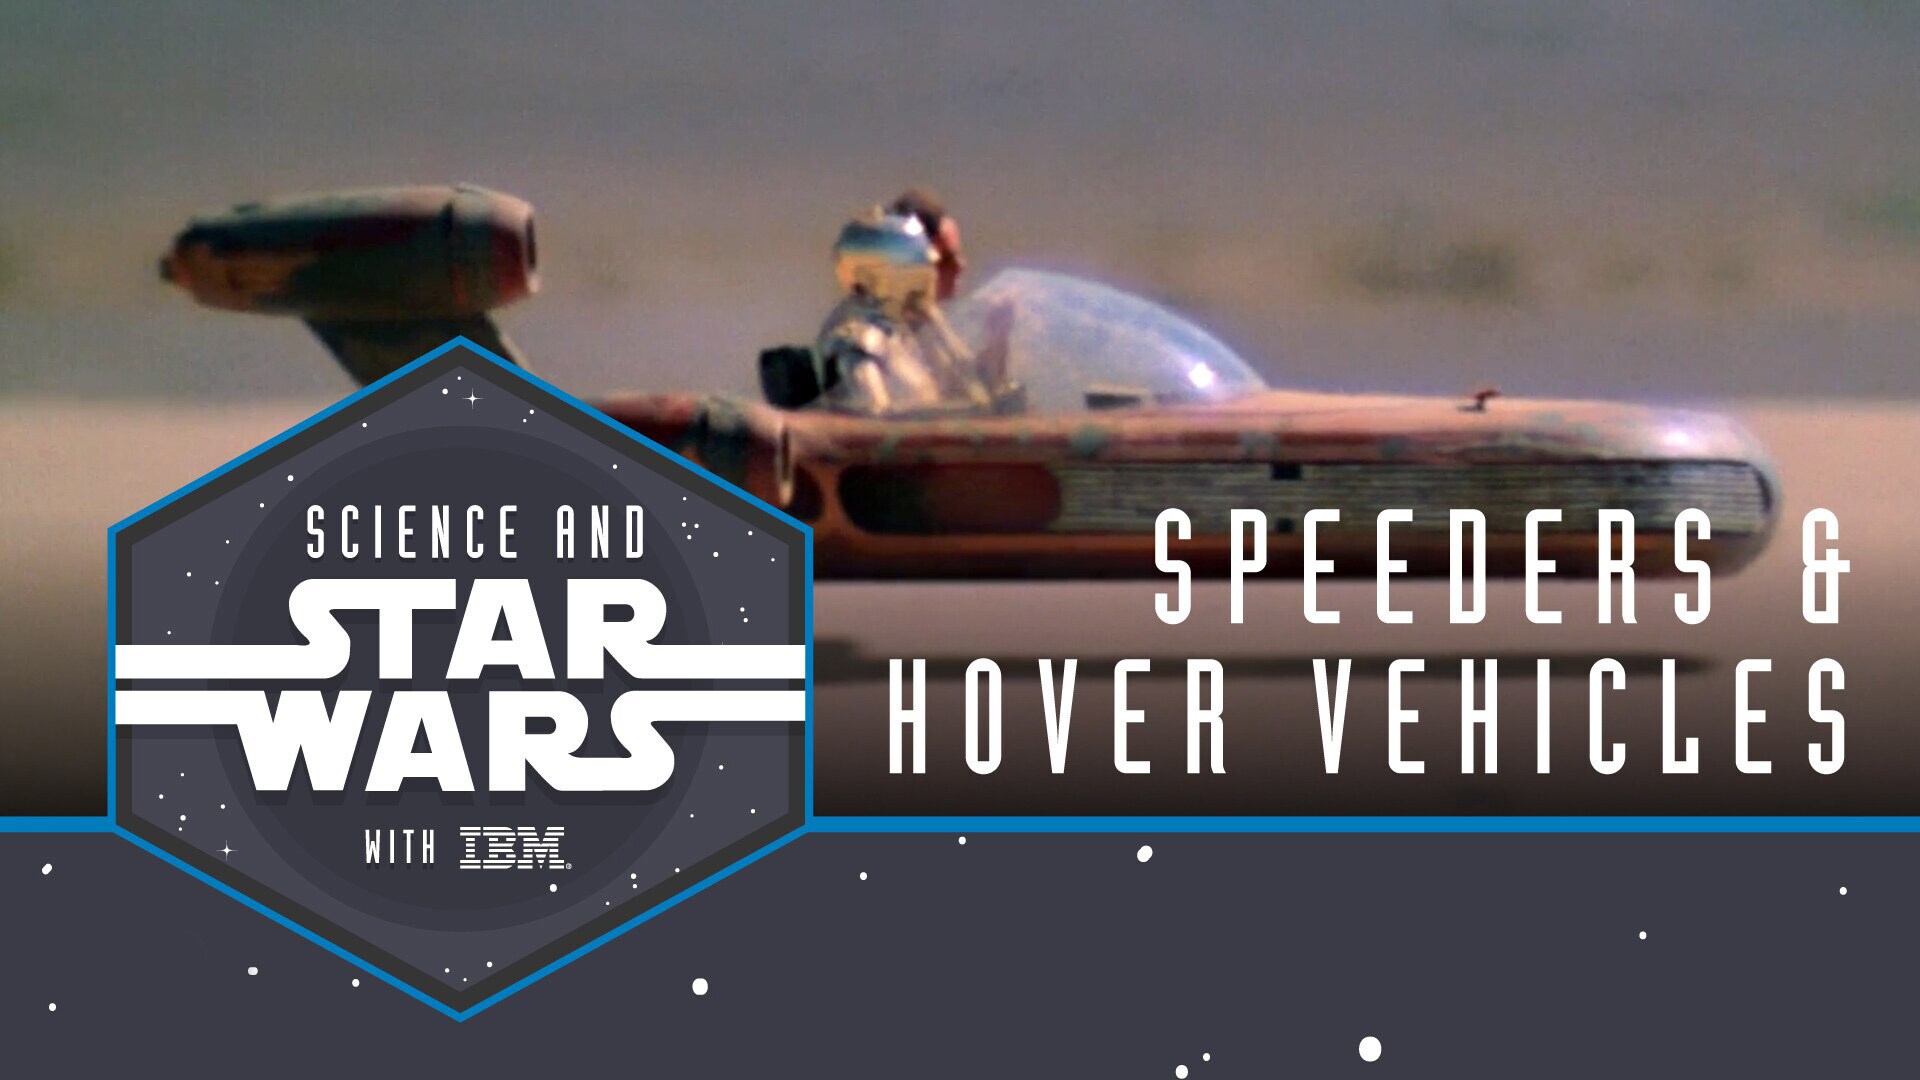 Speeders and Hover Vehicles | Science and Star Wars